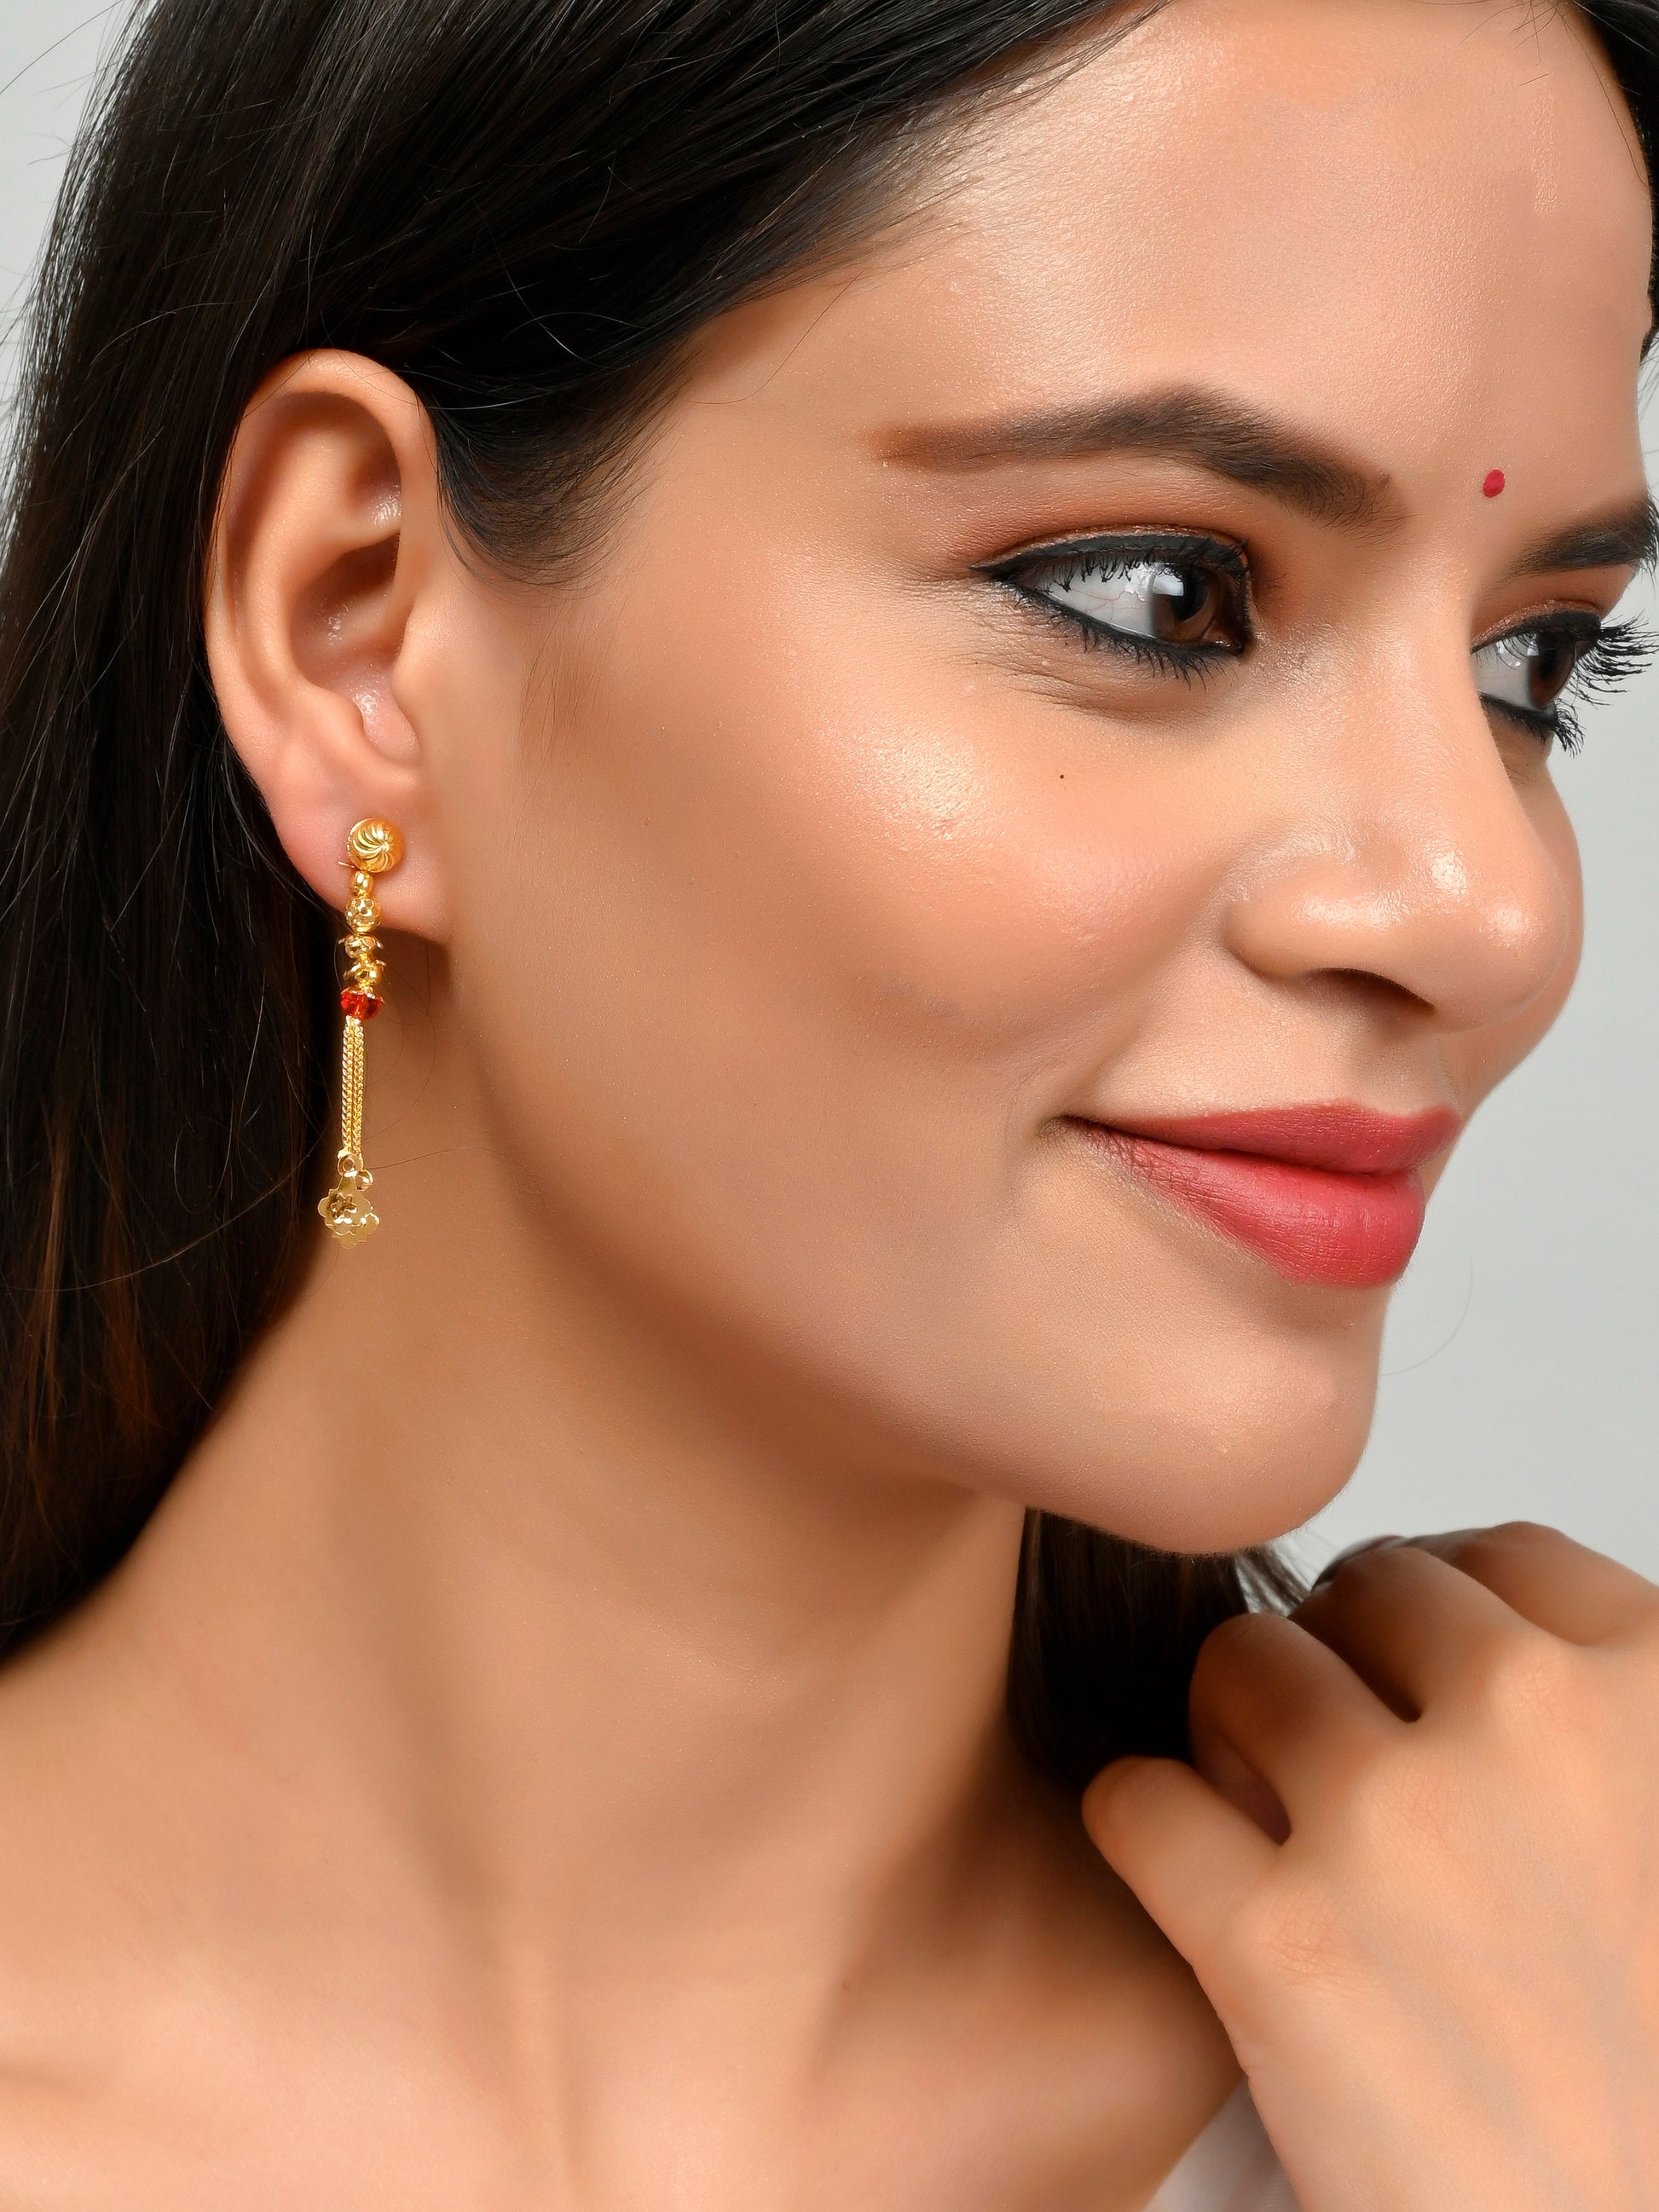 Set of 2 Gold Plated Contemporary Hoop and Dangle Earrings